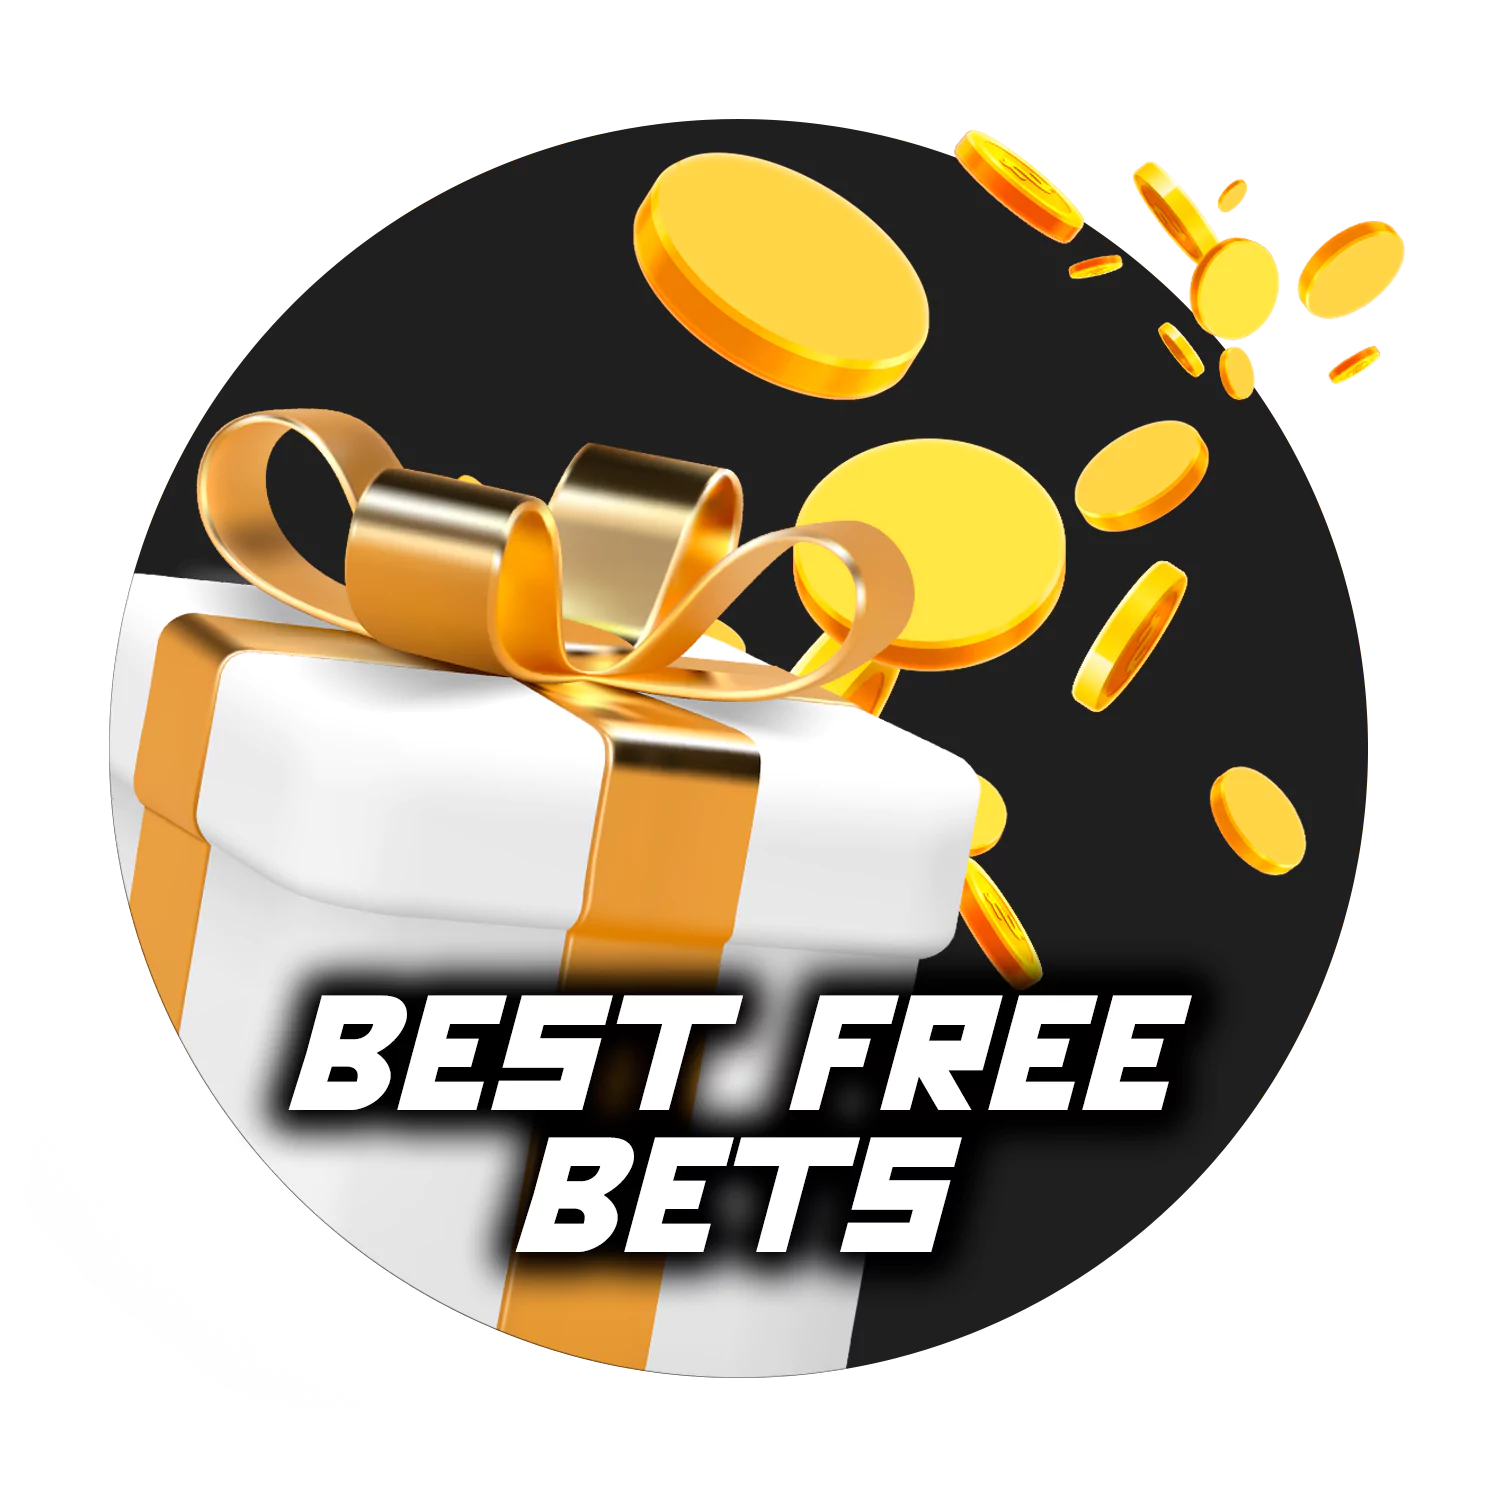 The best free bets bonuses for cricket betting in India.